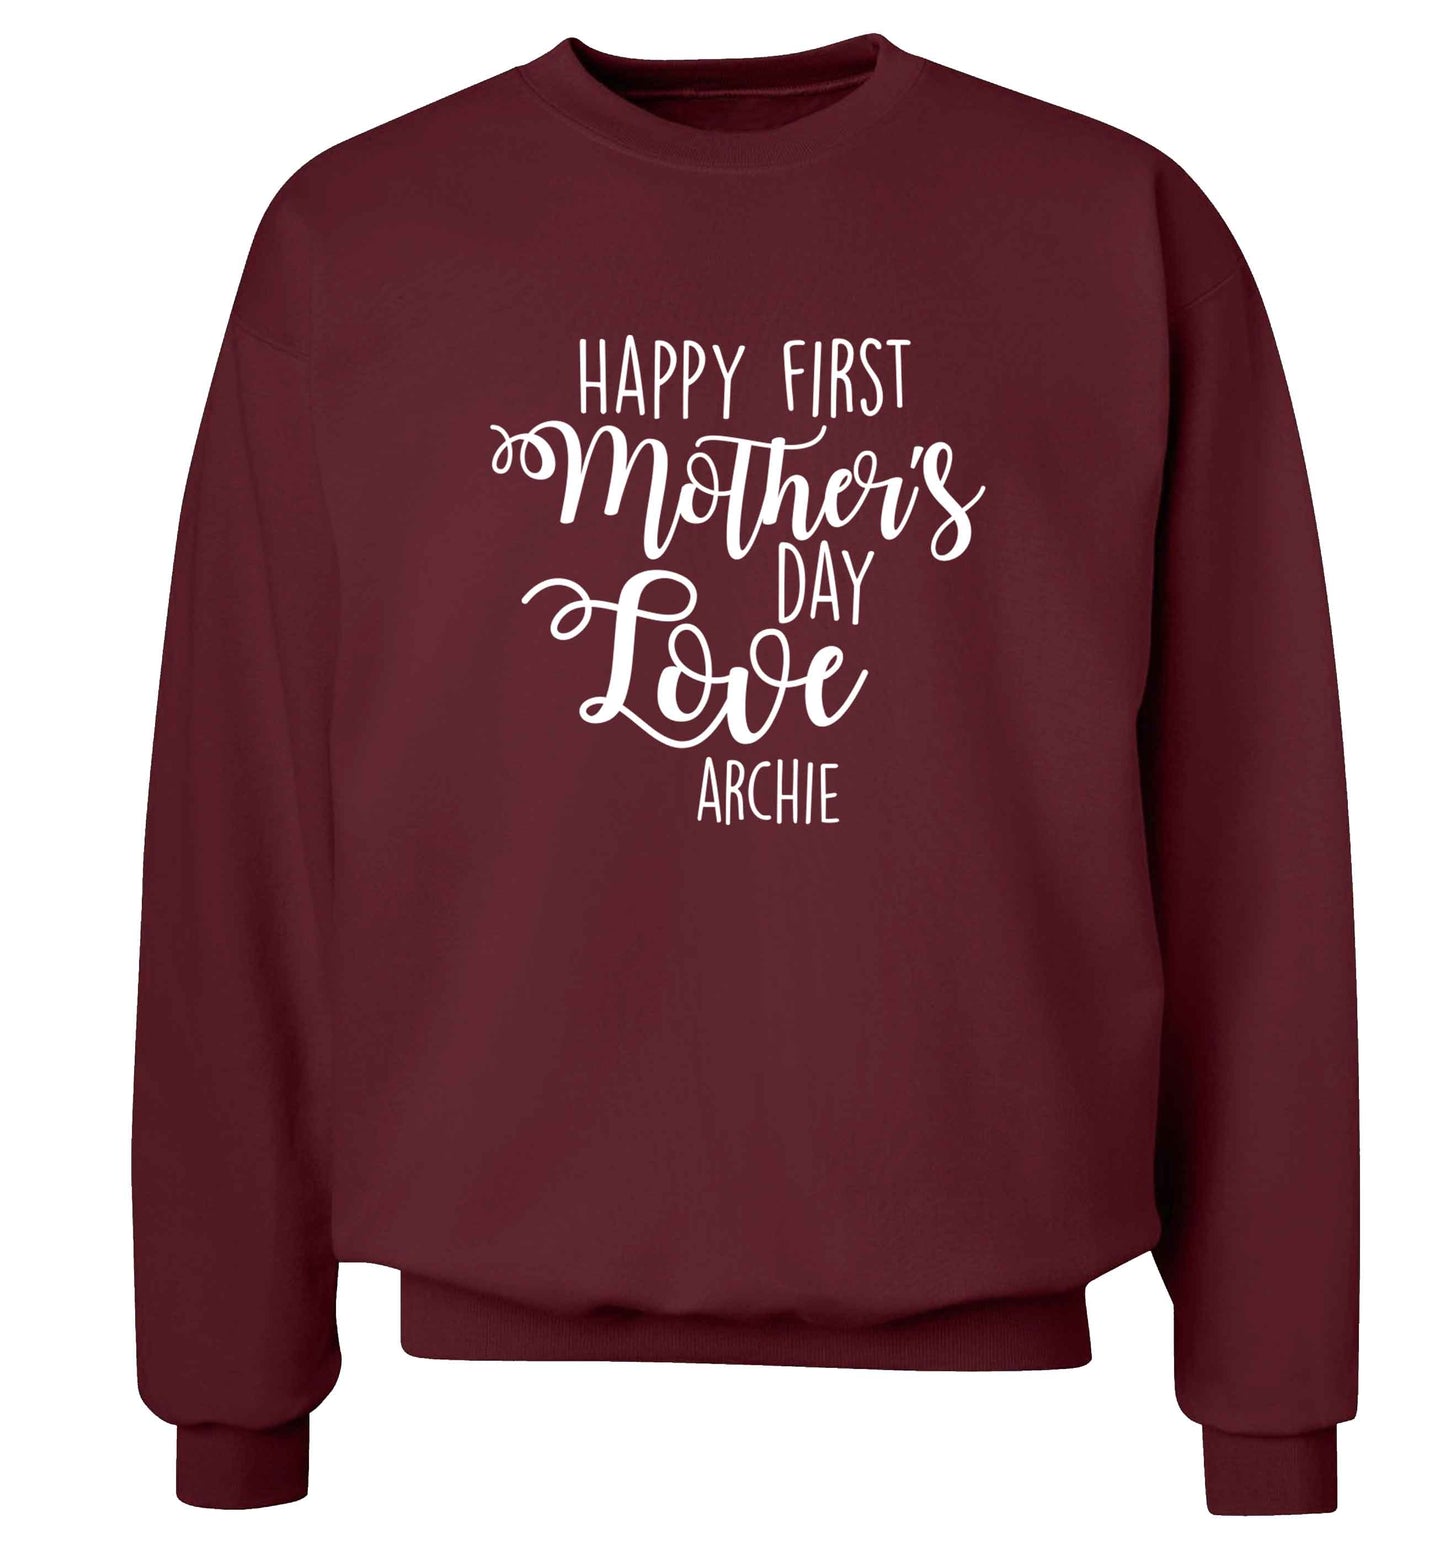 Personalised happy first mother's day love adult's unisex maroon sweater 2XL